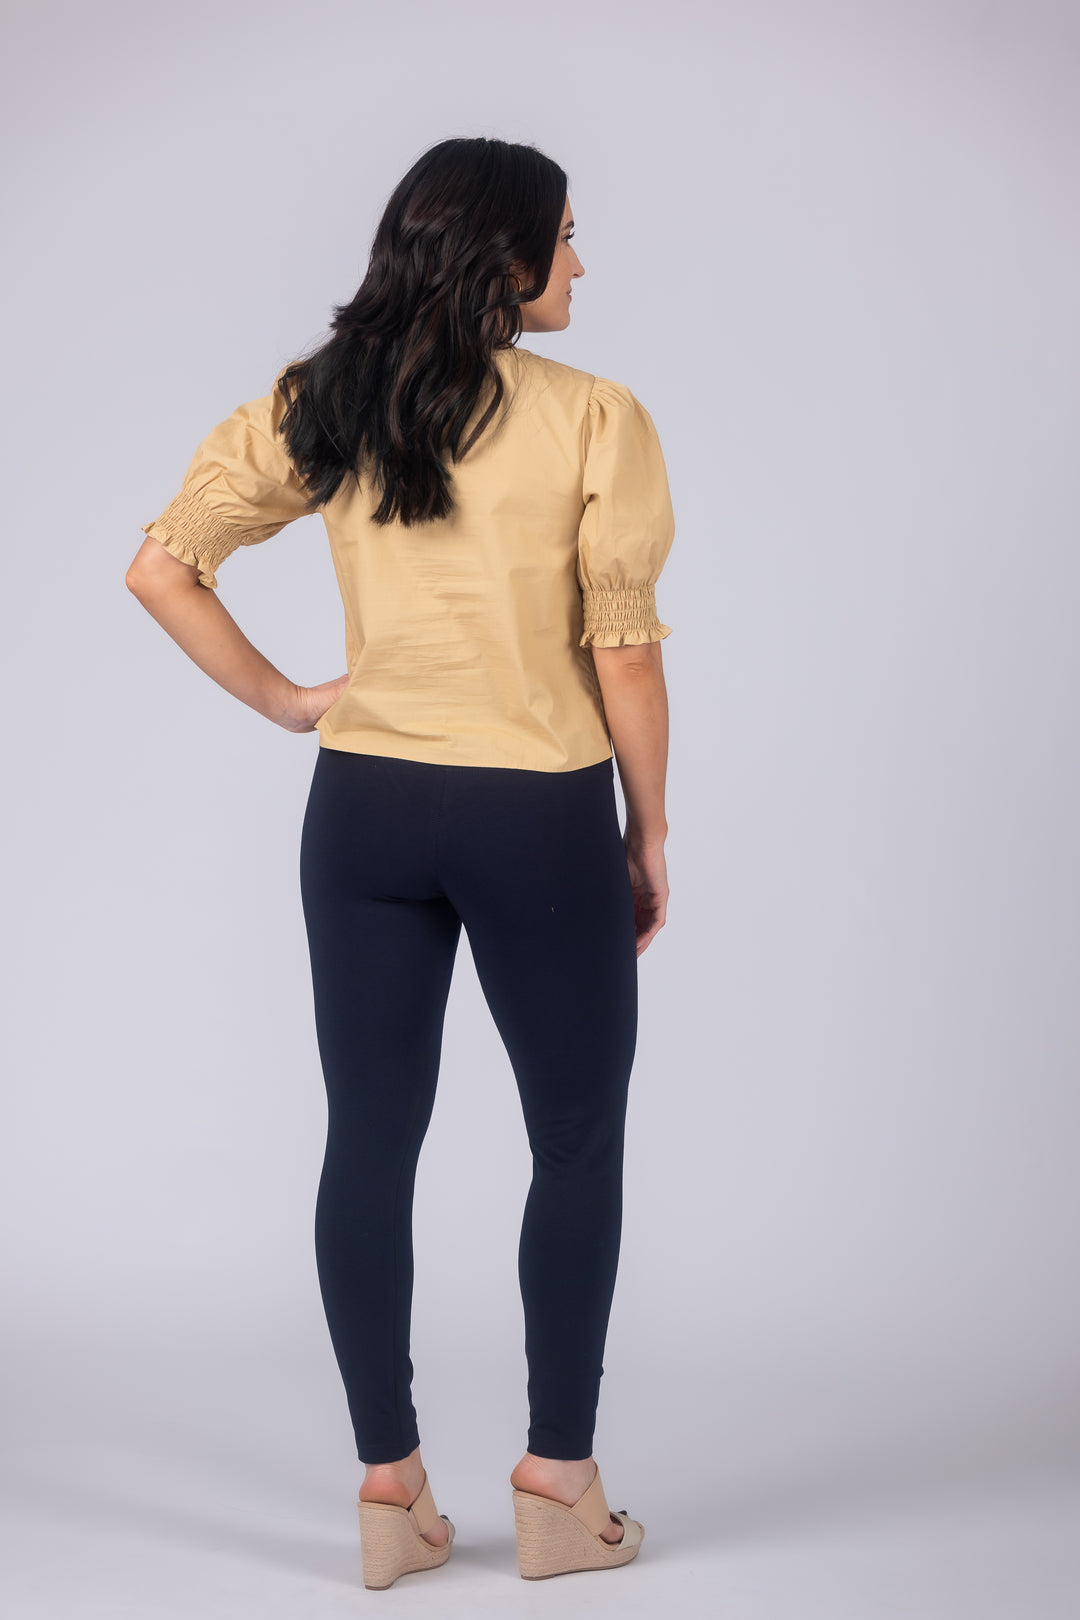 Intro Knit Jersey Love The Fit Pull-On Embroidered Scallop Hem Capri  Leggings